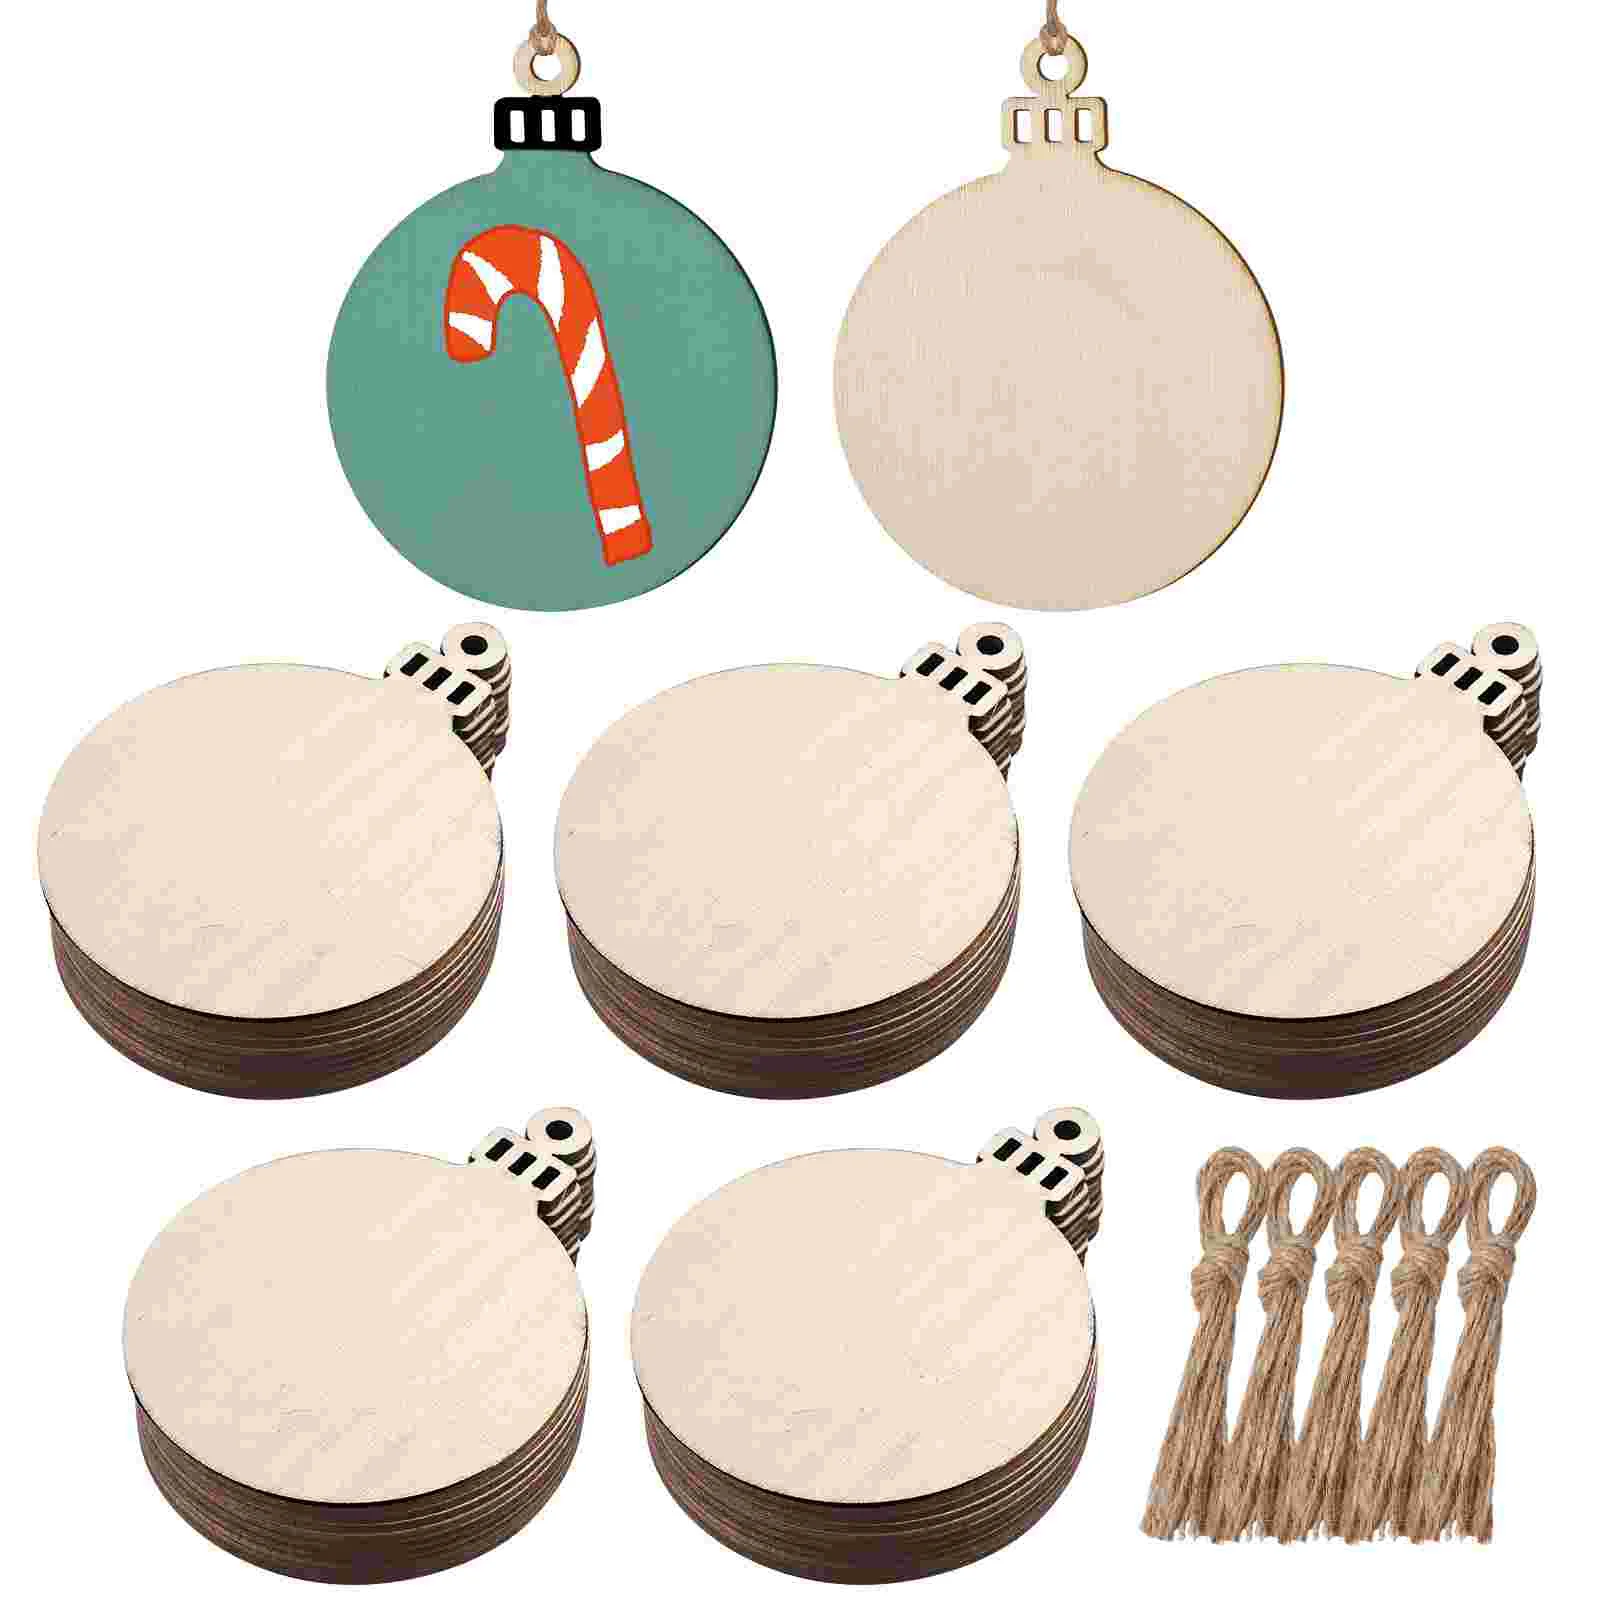 

50pcs Christmas Wood Slice, Unfinished Predrilled Wood Slices with Holes and Rope, Wooden Christmas Ornaments Hanging Wood Tags